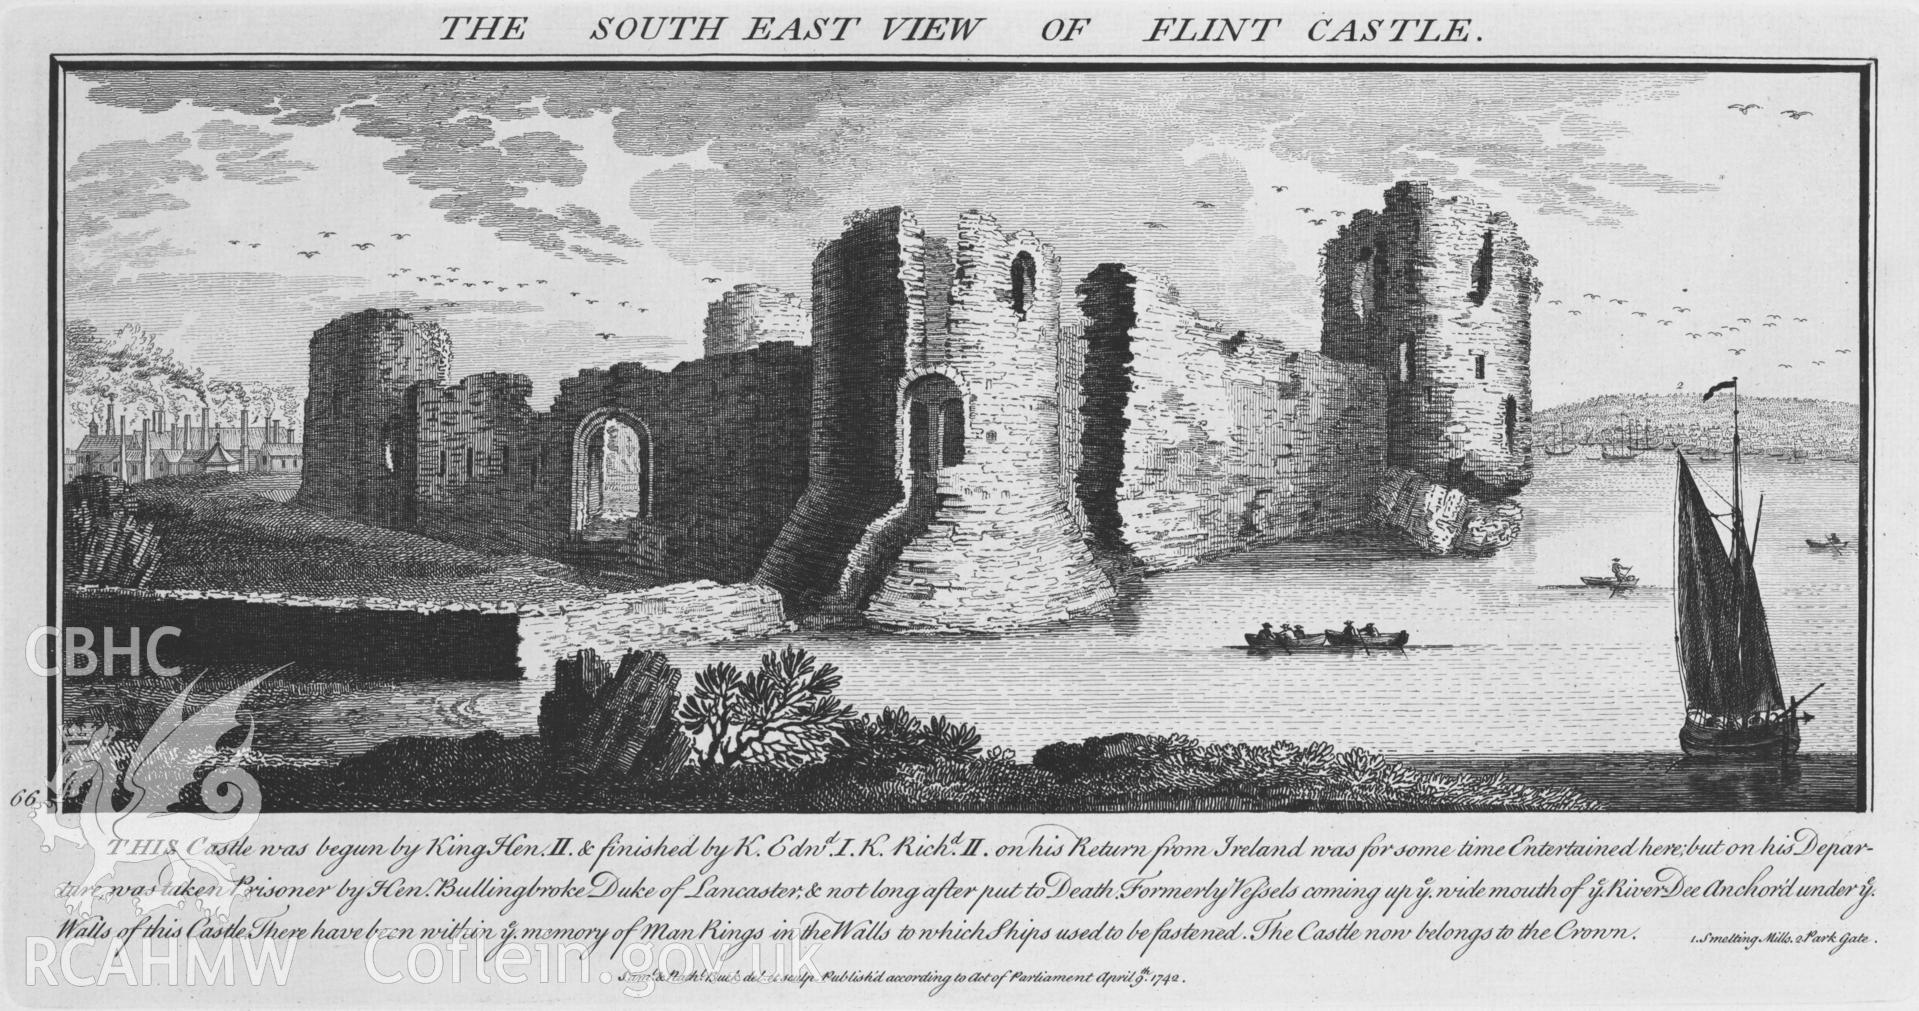 Black and white photograph relating to Flint Castle: copy of an engraving, entitled 'The South East View of Flint Castle', from Buck's Antiquities.